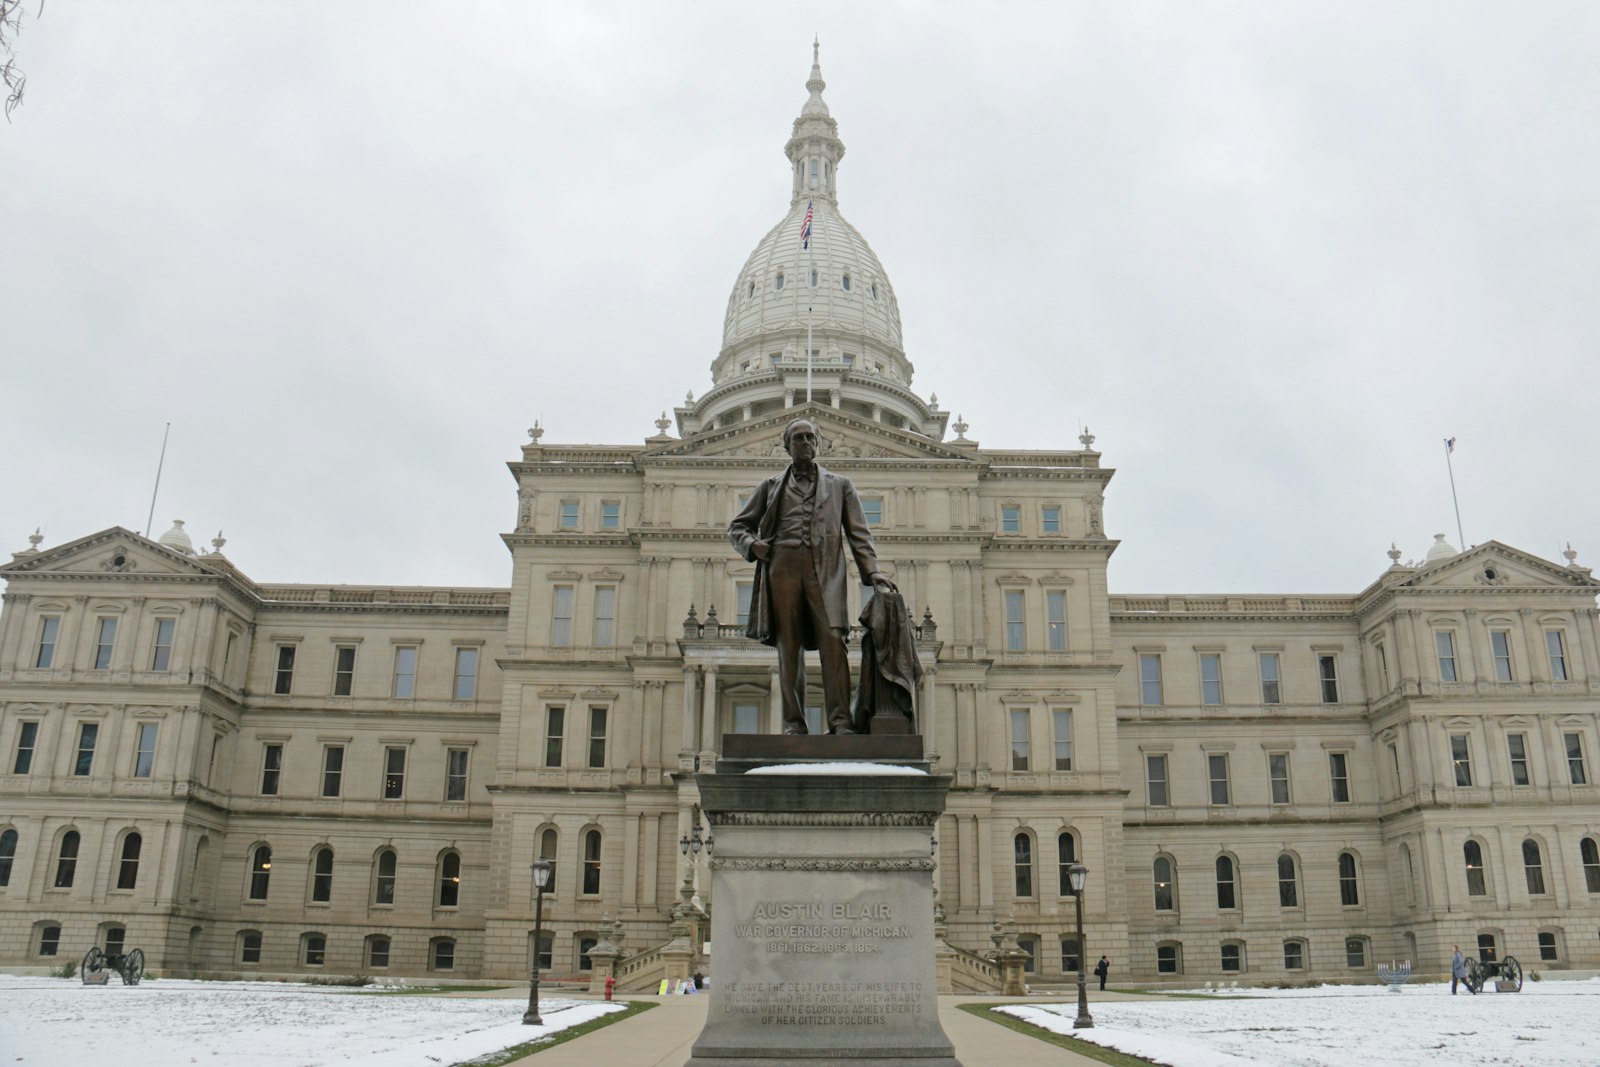 Michigan's Capitol building is pictured in Lansing in this file photo. (Detroit Catholic photo)